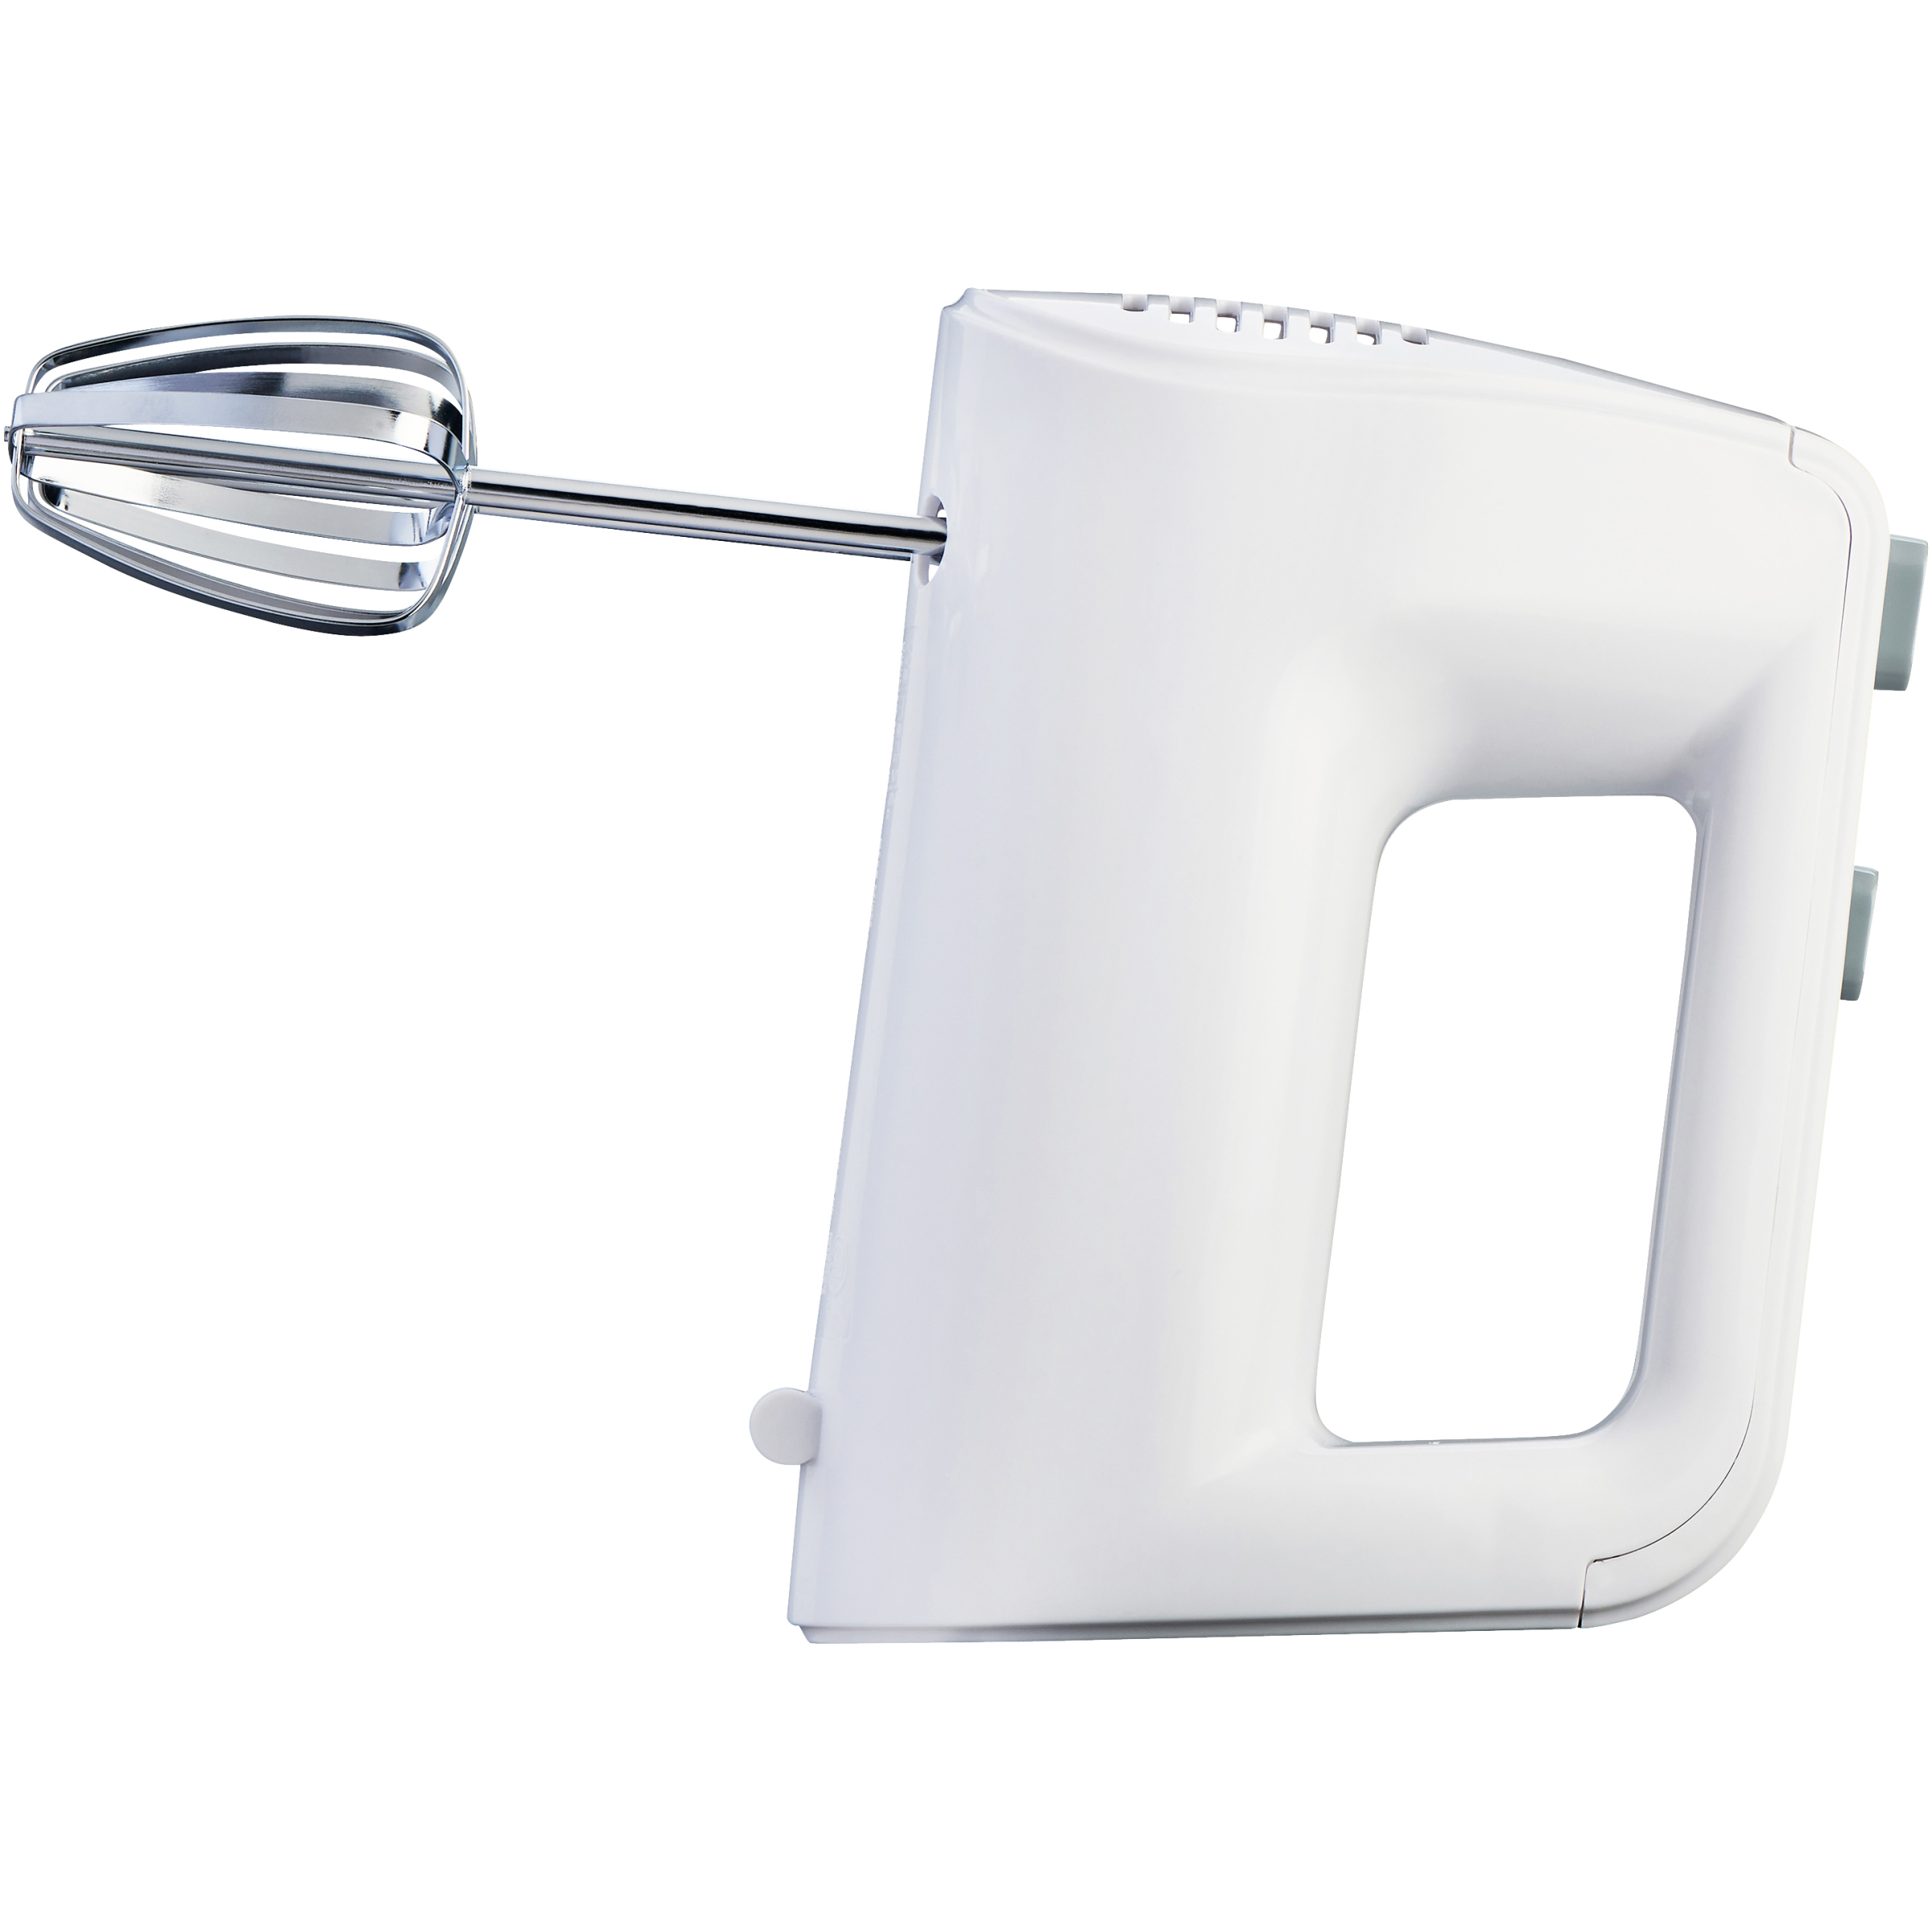 Mainstays 5-Speed 150-Watts Hand Mixer with Chrome Beaters, White - image 5 of 5